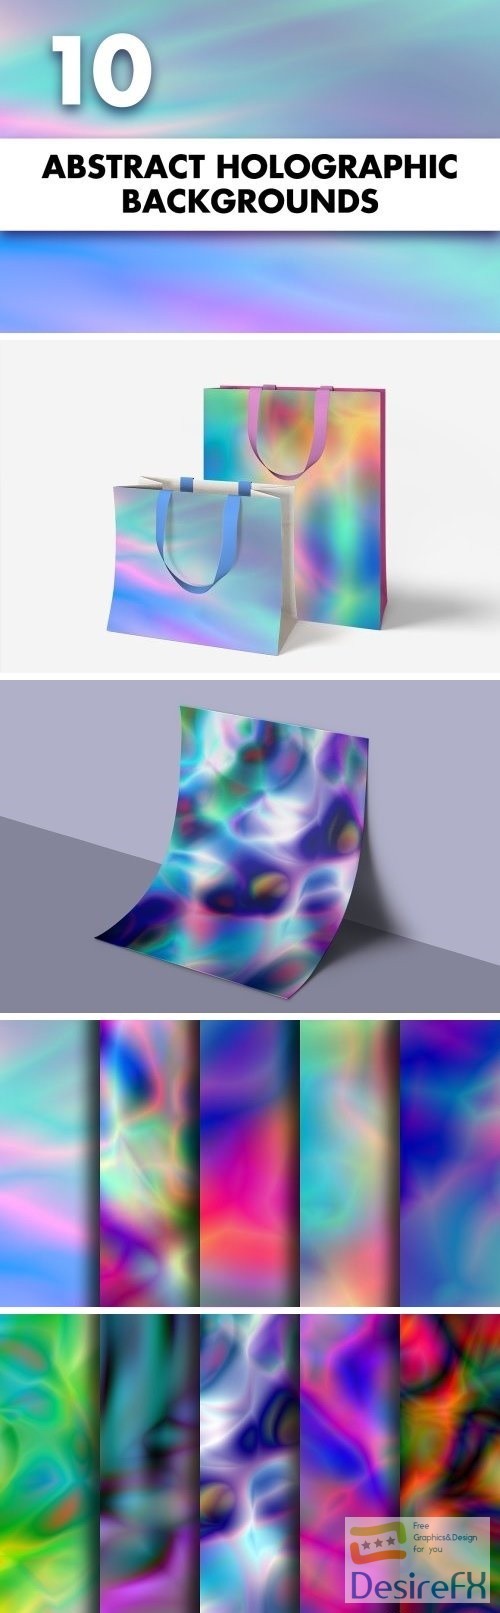 Abstract Holographic Backgrounds 1152072